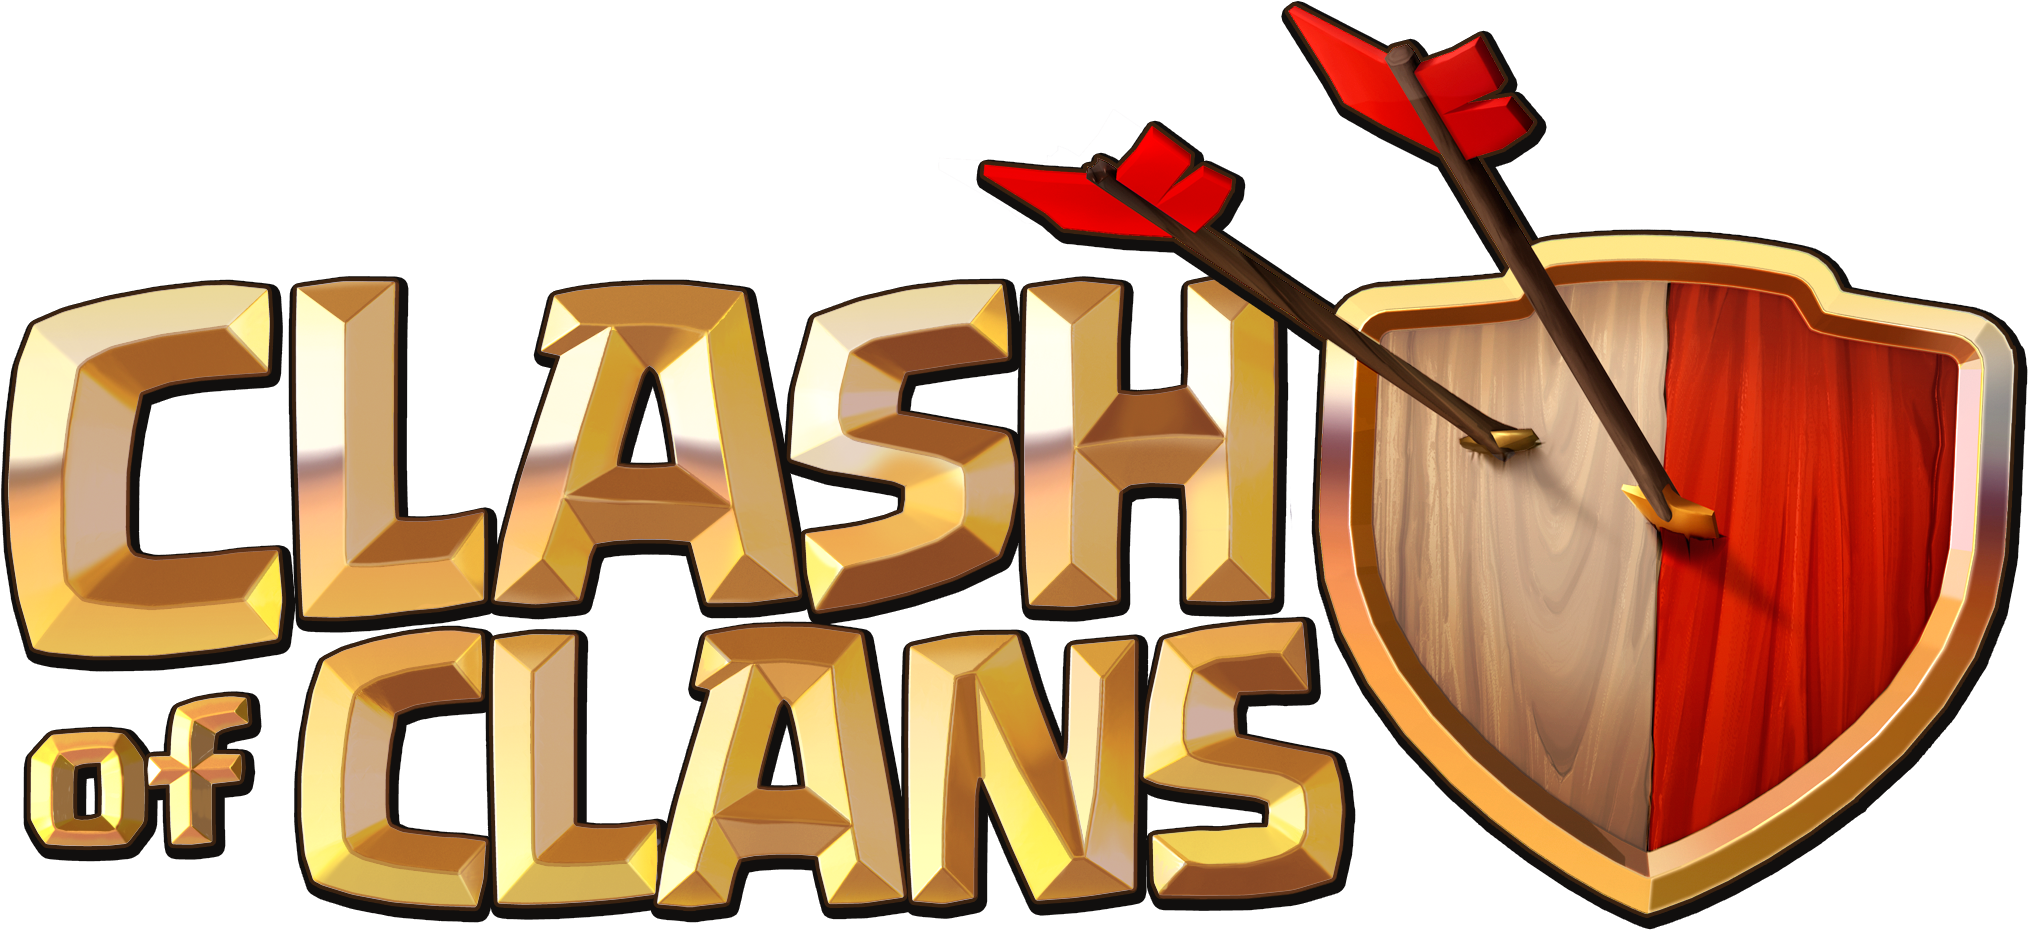 Clash Of Clans Logo With Arrow And Target